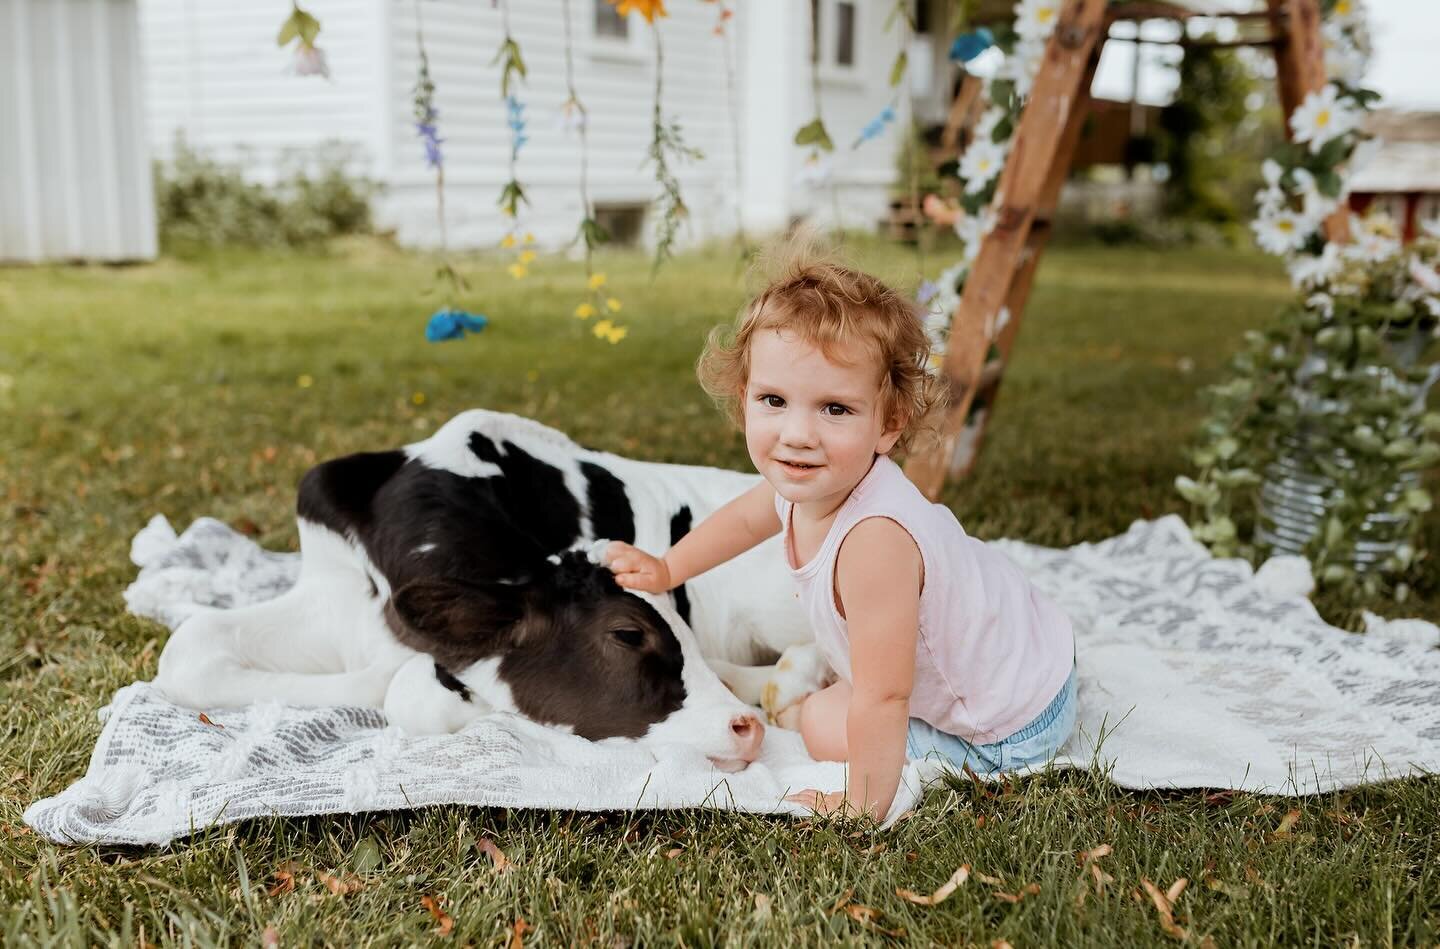 🌷🐮 Spring Calf Mini photo sessions🐮🌷

@freerangephotography__  will be back here at the farm on April 14th for another round! 12-4pm! 
 
This is one of our most popular events and always books out fast so if you&rsquo;re interested, don&rsquo;t w